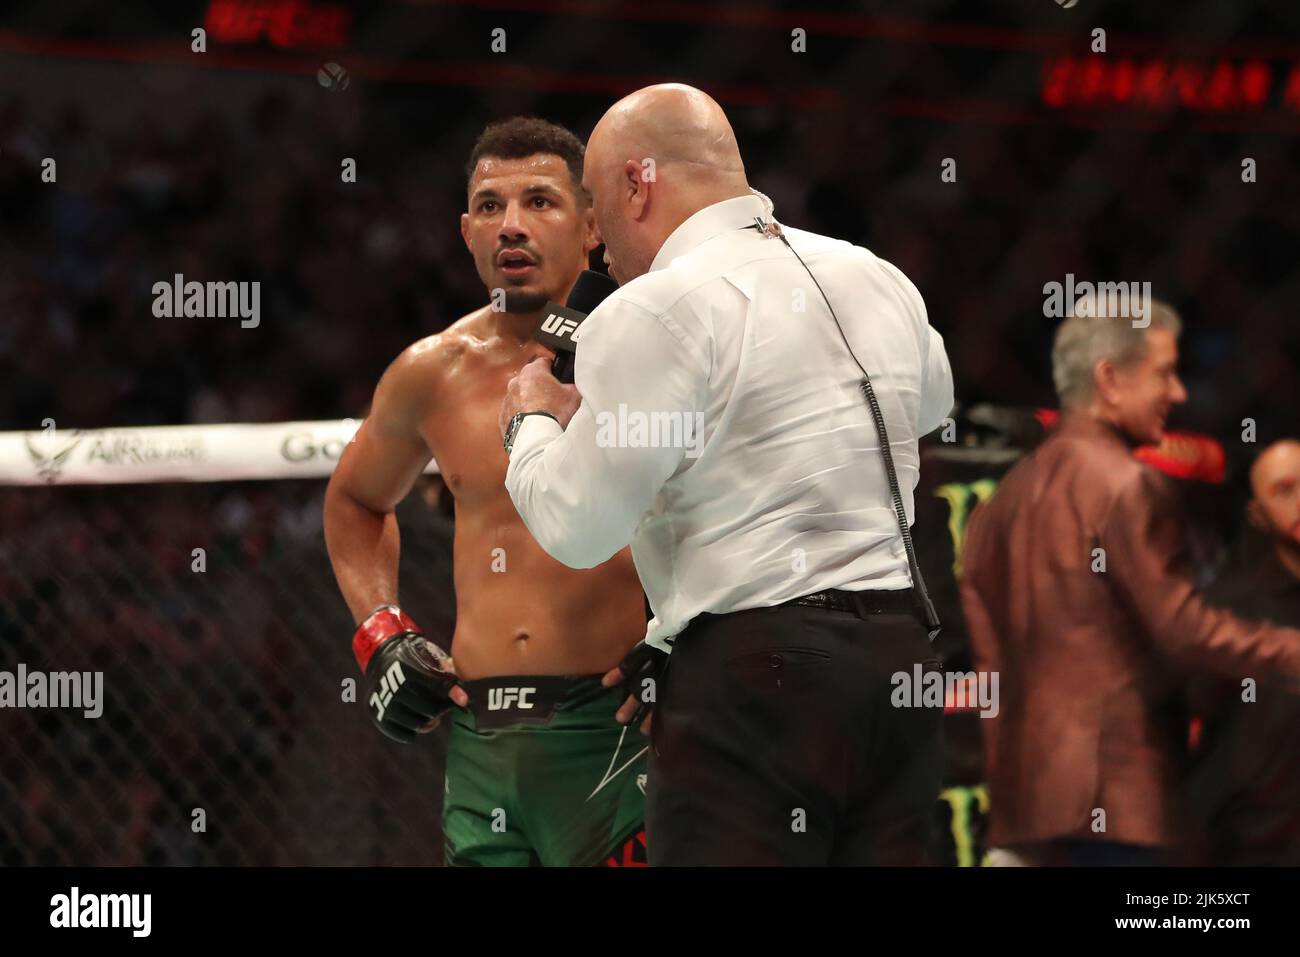 DALLAS, TX - JULY 30: Drakkar Klose celebrates his victory over Rafa Garcia in their Lightweight bout during the UFC 277 event at American Airlines Center on July 30, 2022, in Dallas, Texas, United States. (Photo by Alejandro Salazar/PxImages) Credit: Px Images/Alamy Live News Stock Photo